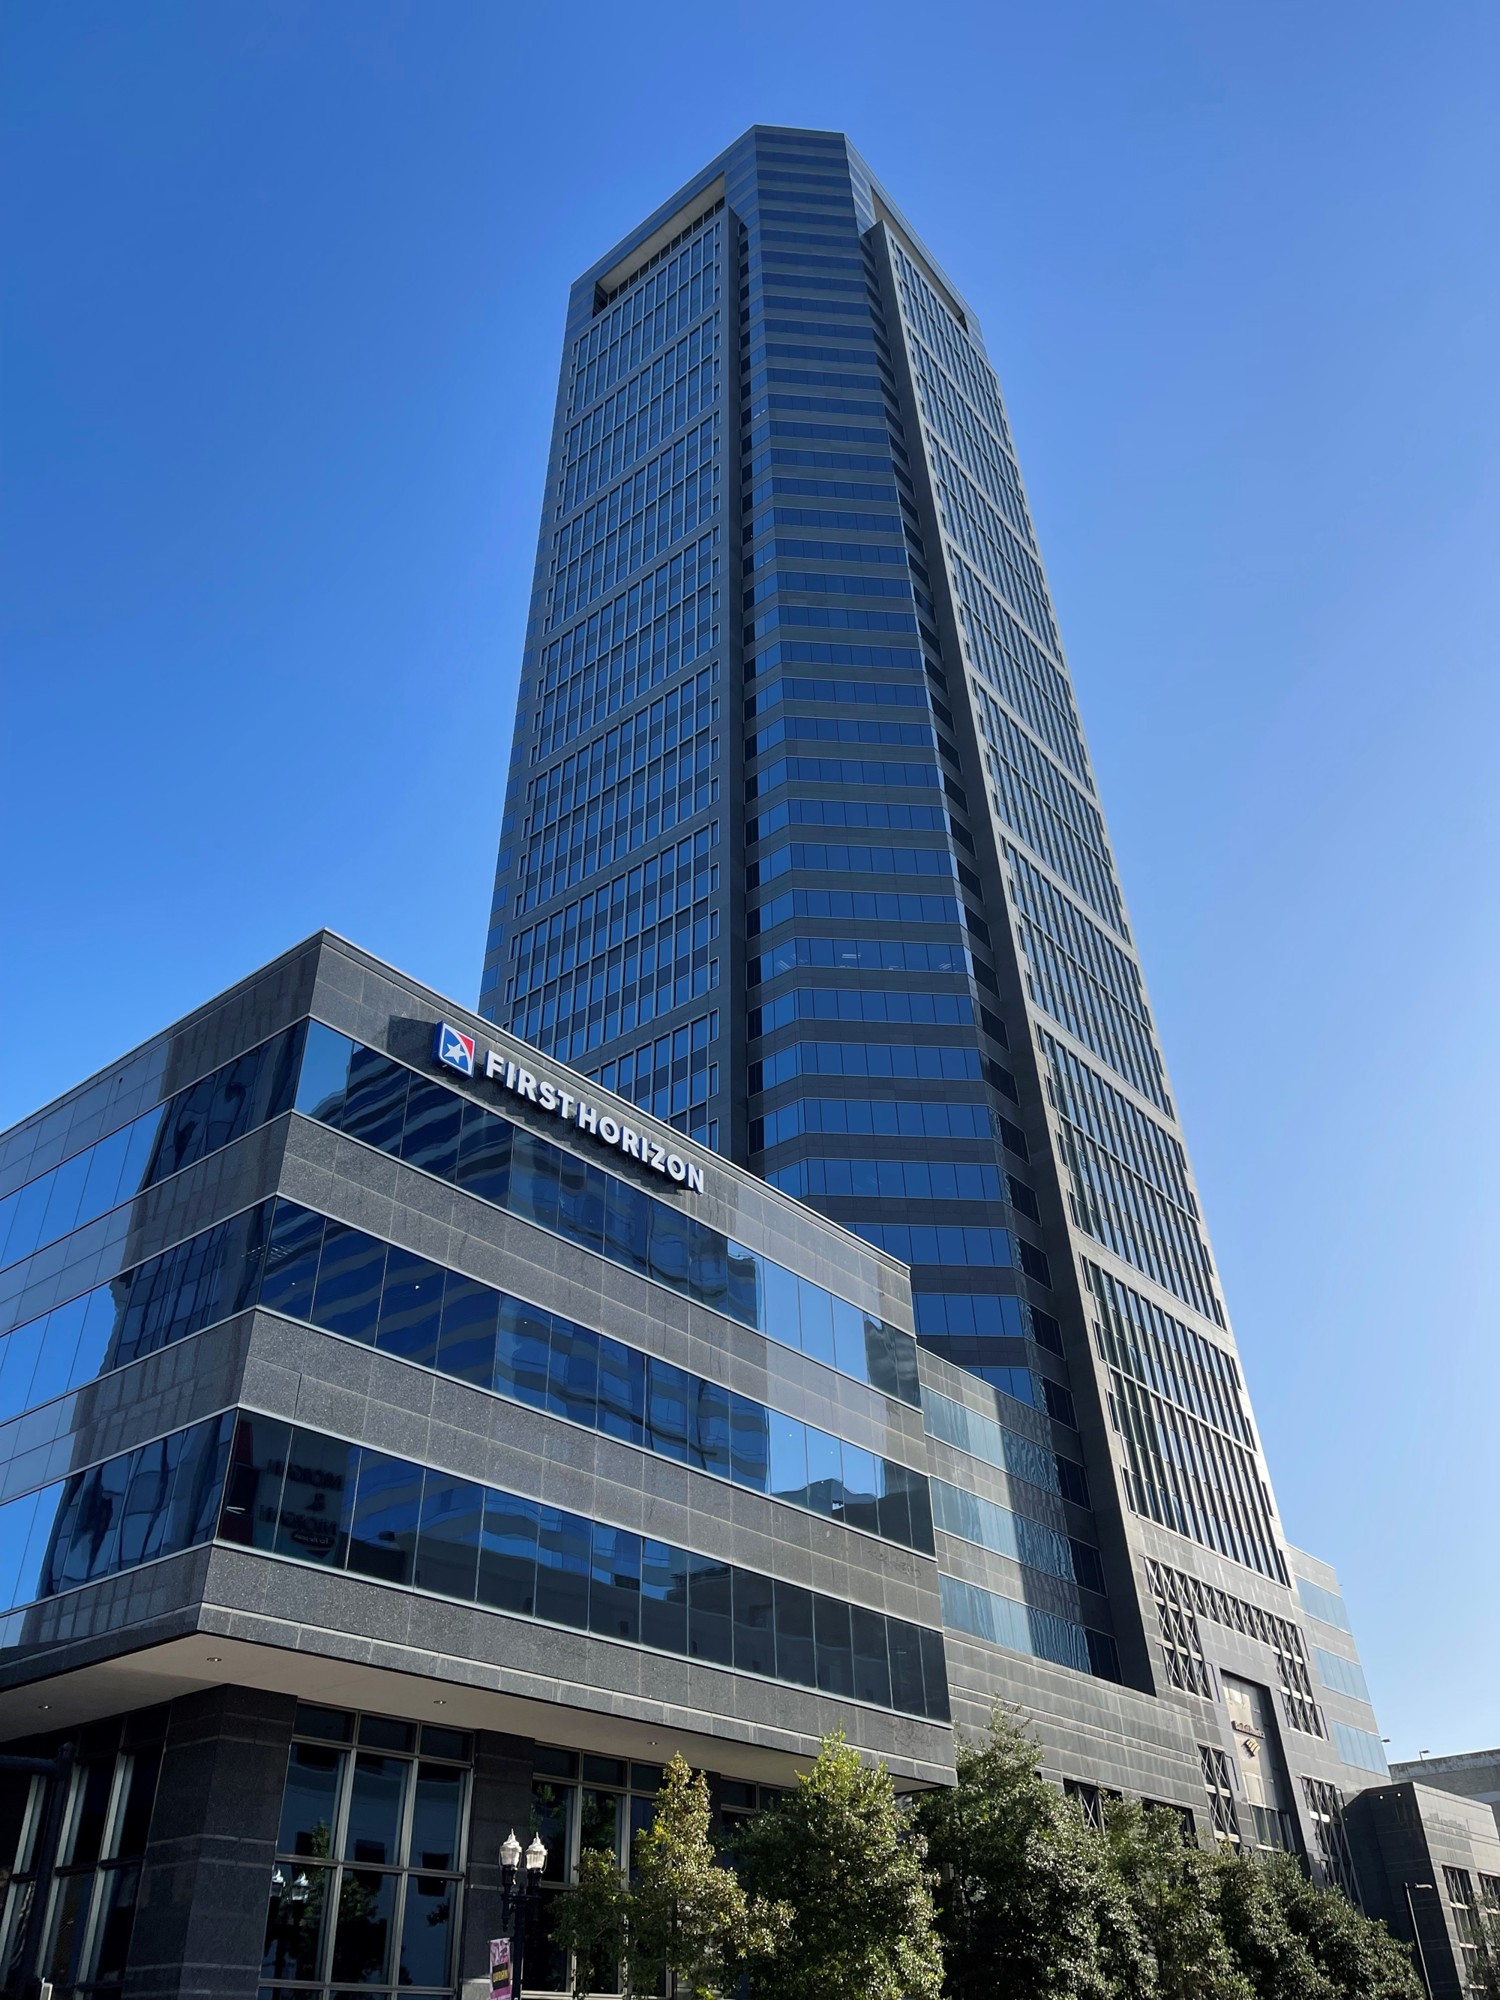 The First Horizon name change is completed at 135 W. Bay St.